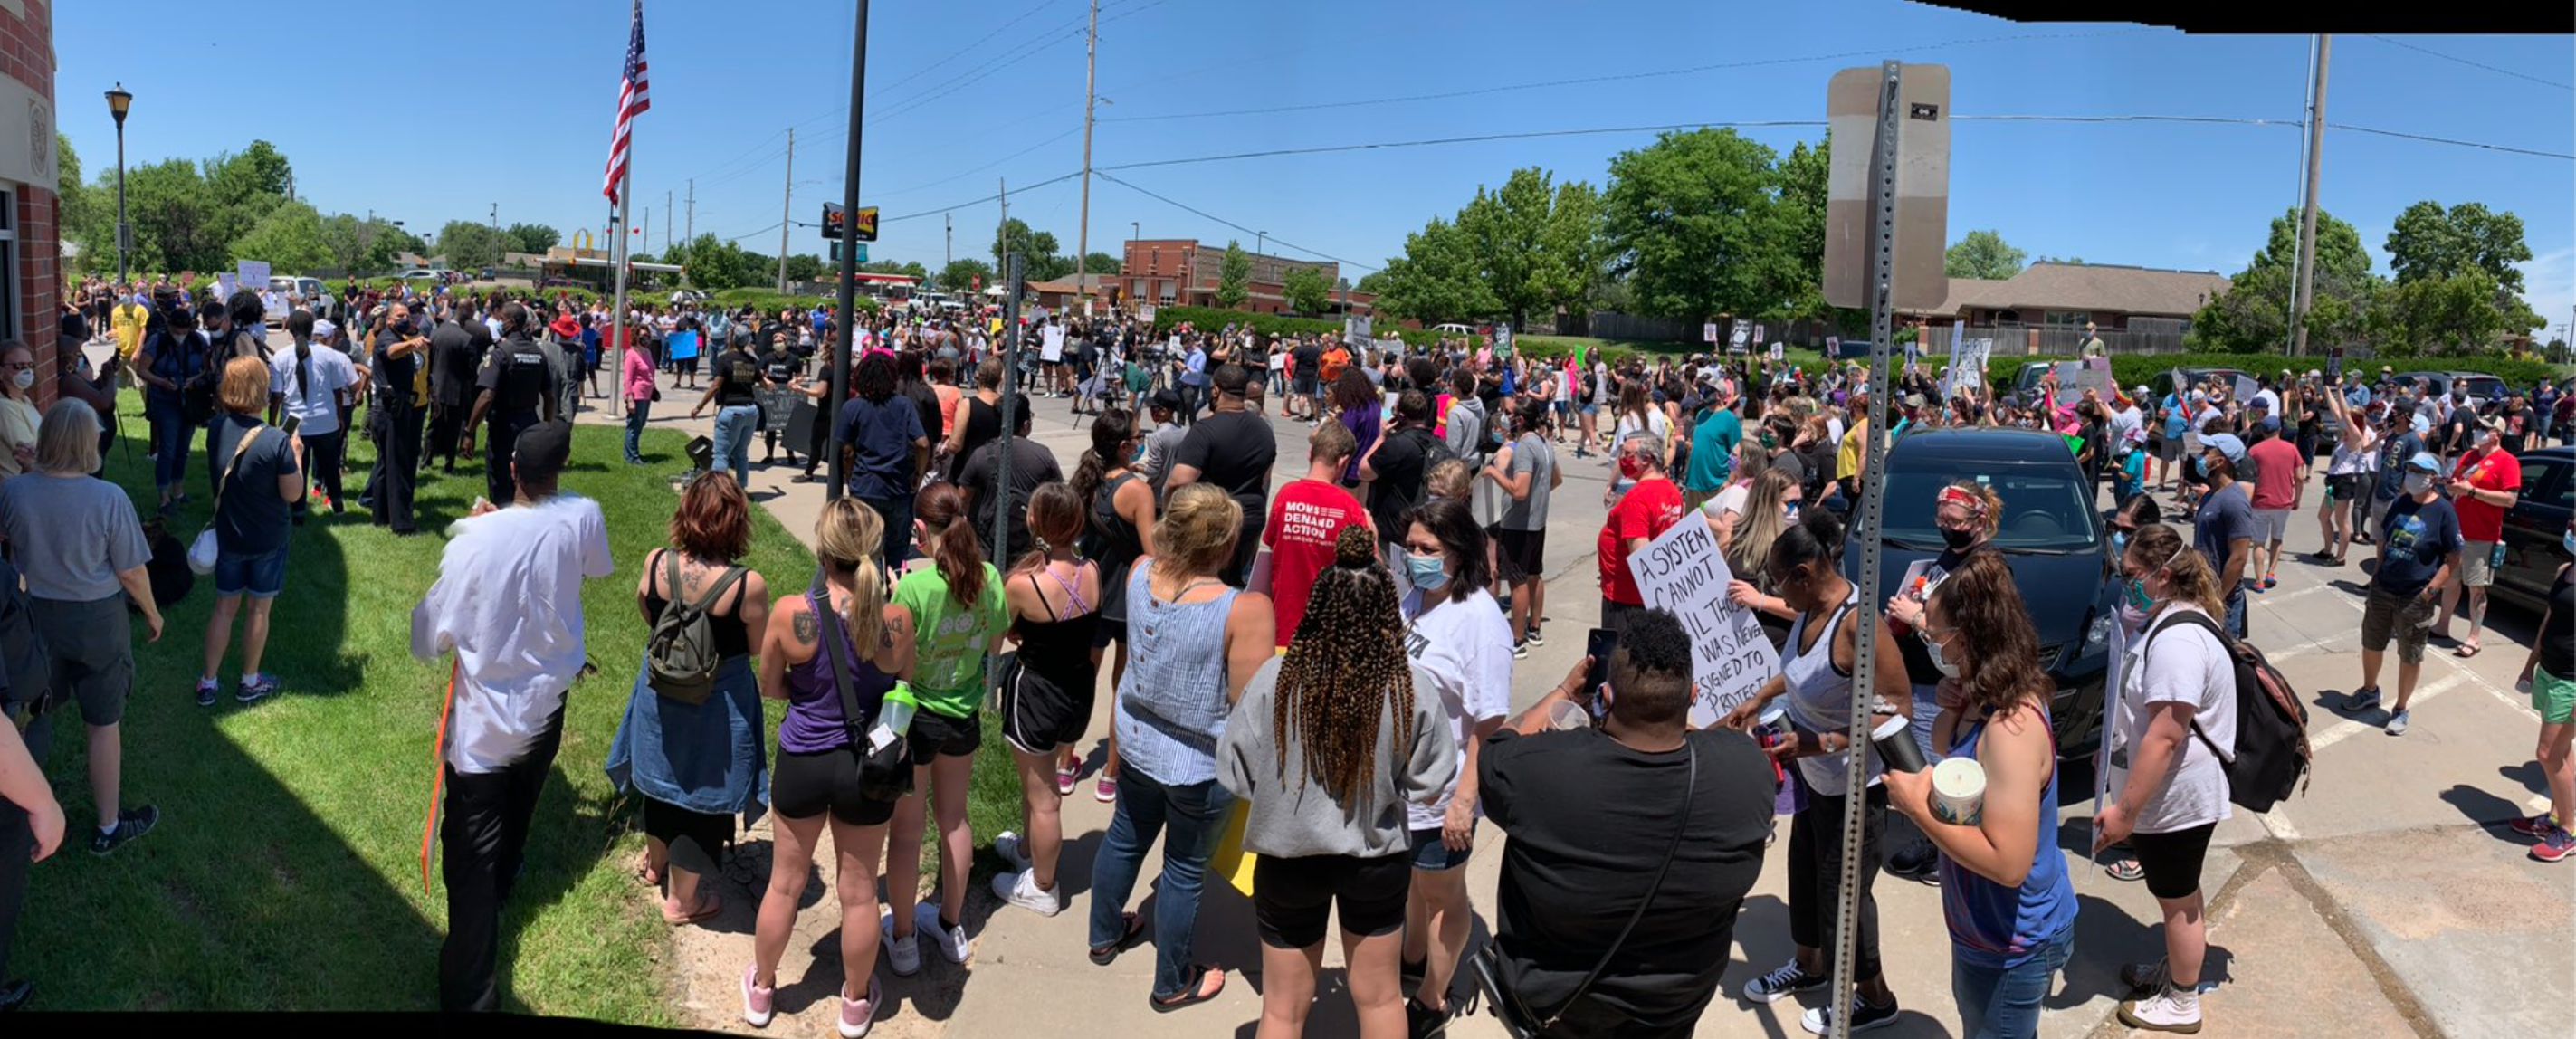 George Floyd protest near the Wichita State University campus.